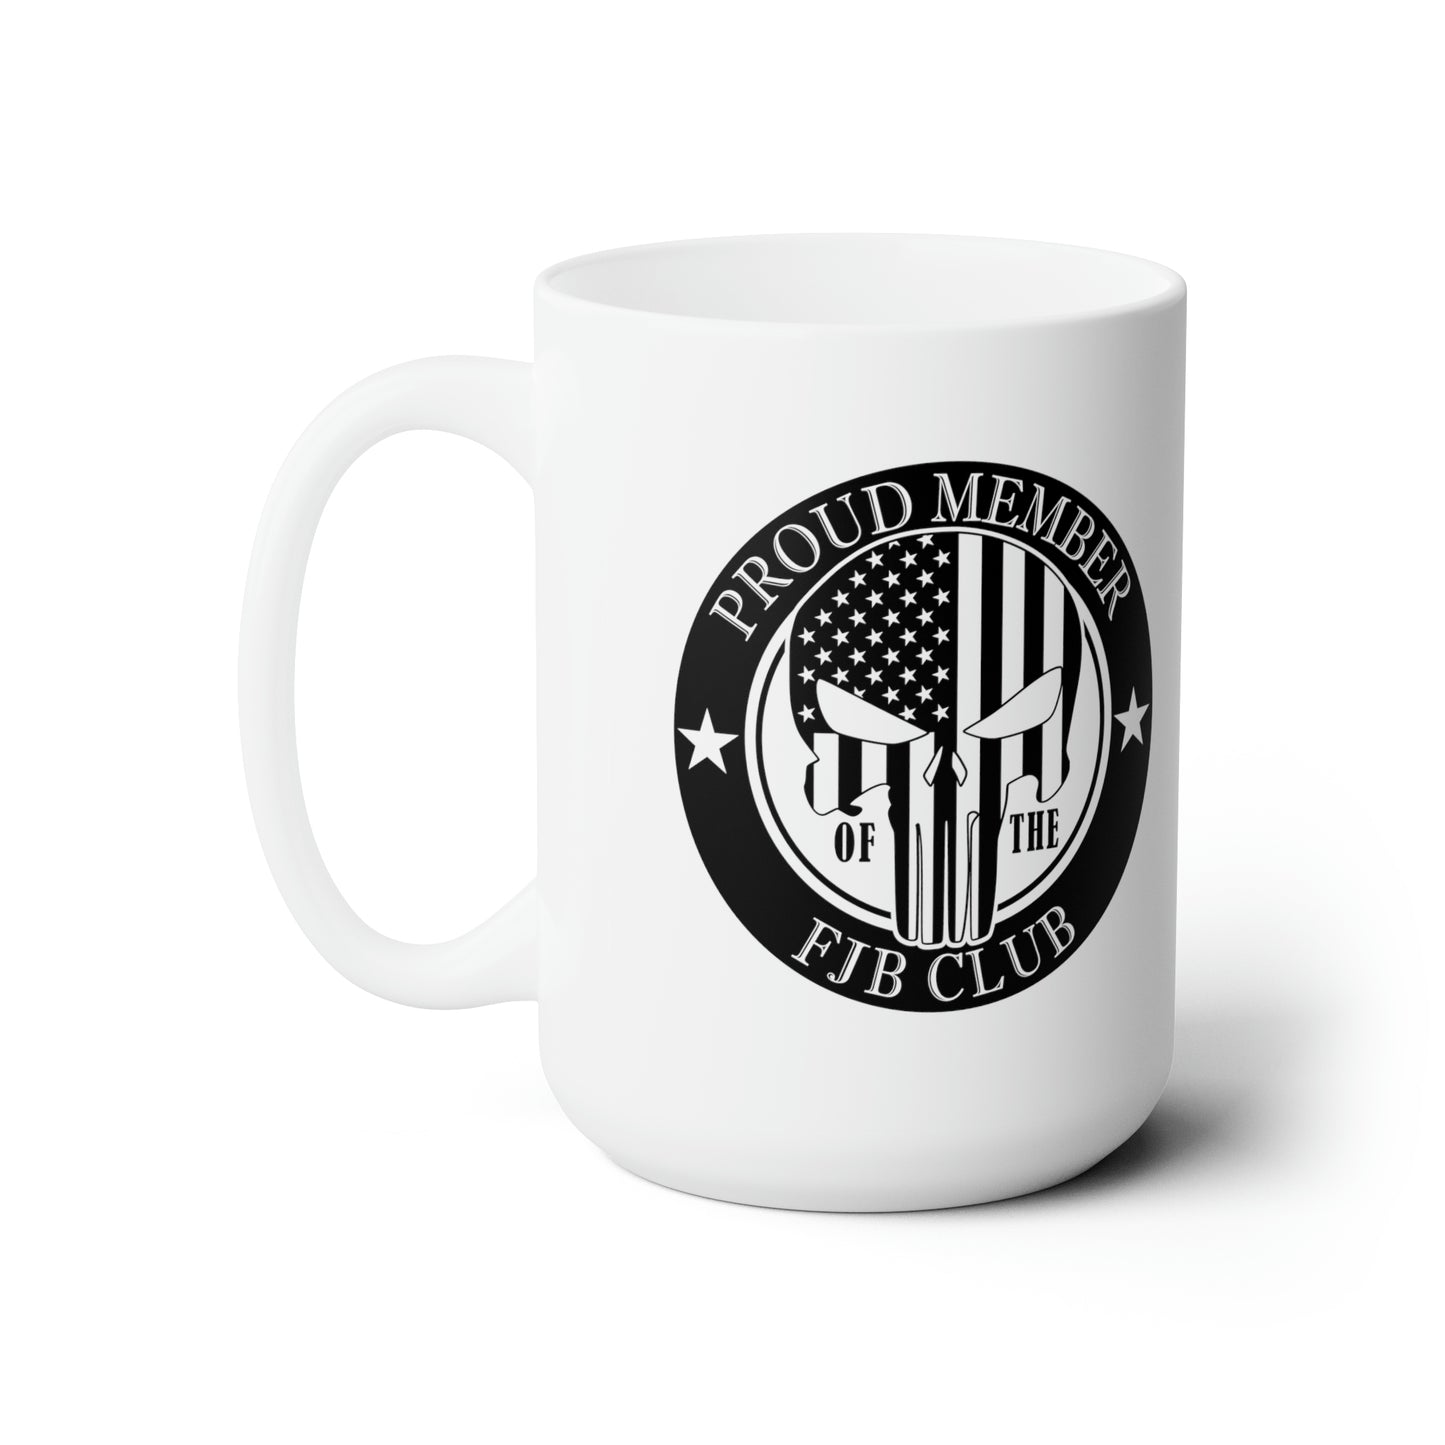 FJB Club Coffee Mug For Conservative Coffee Lovers Cup For MAGA Gift Idea